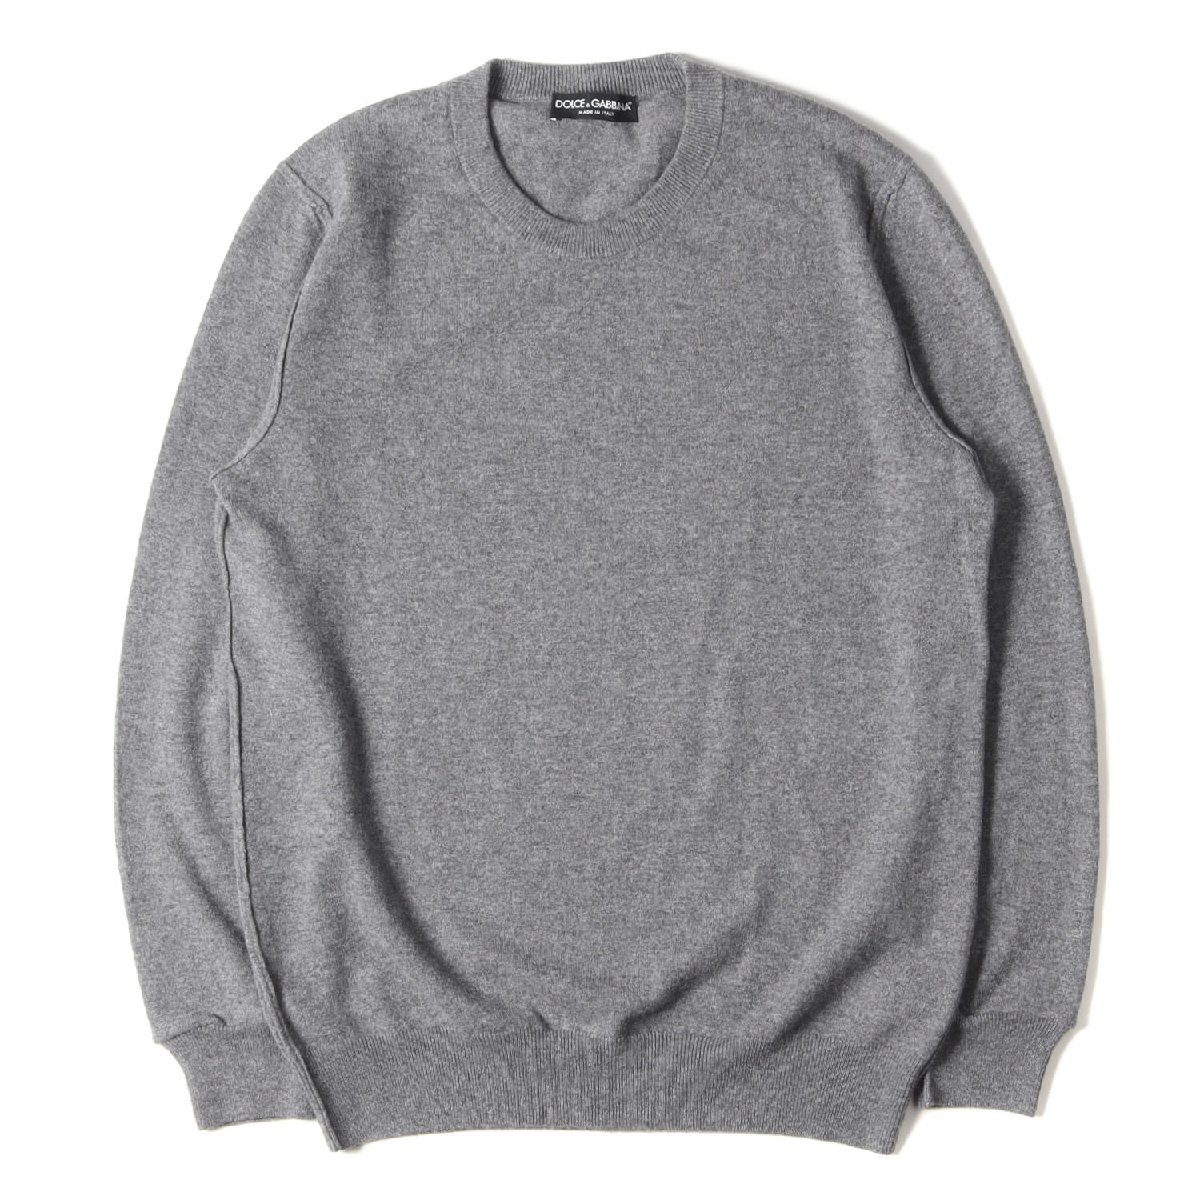 DOLCE&GABBANA Dolce & Gabbana knitted size :56 crew neck cashmere knitted sweater gray Italy made brand casual 